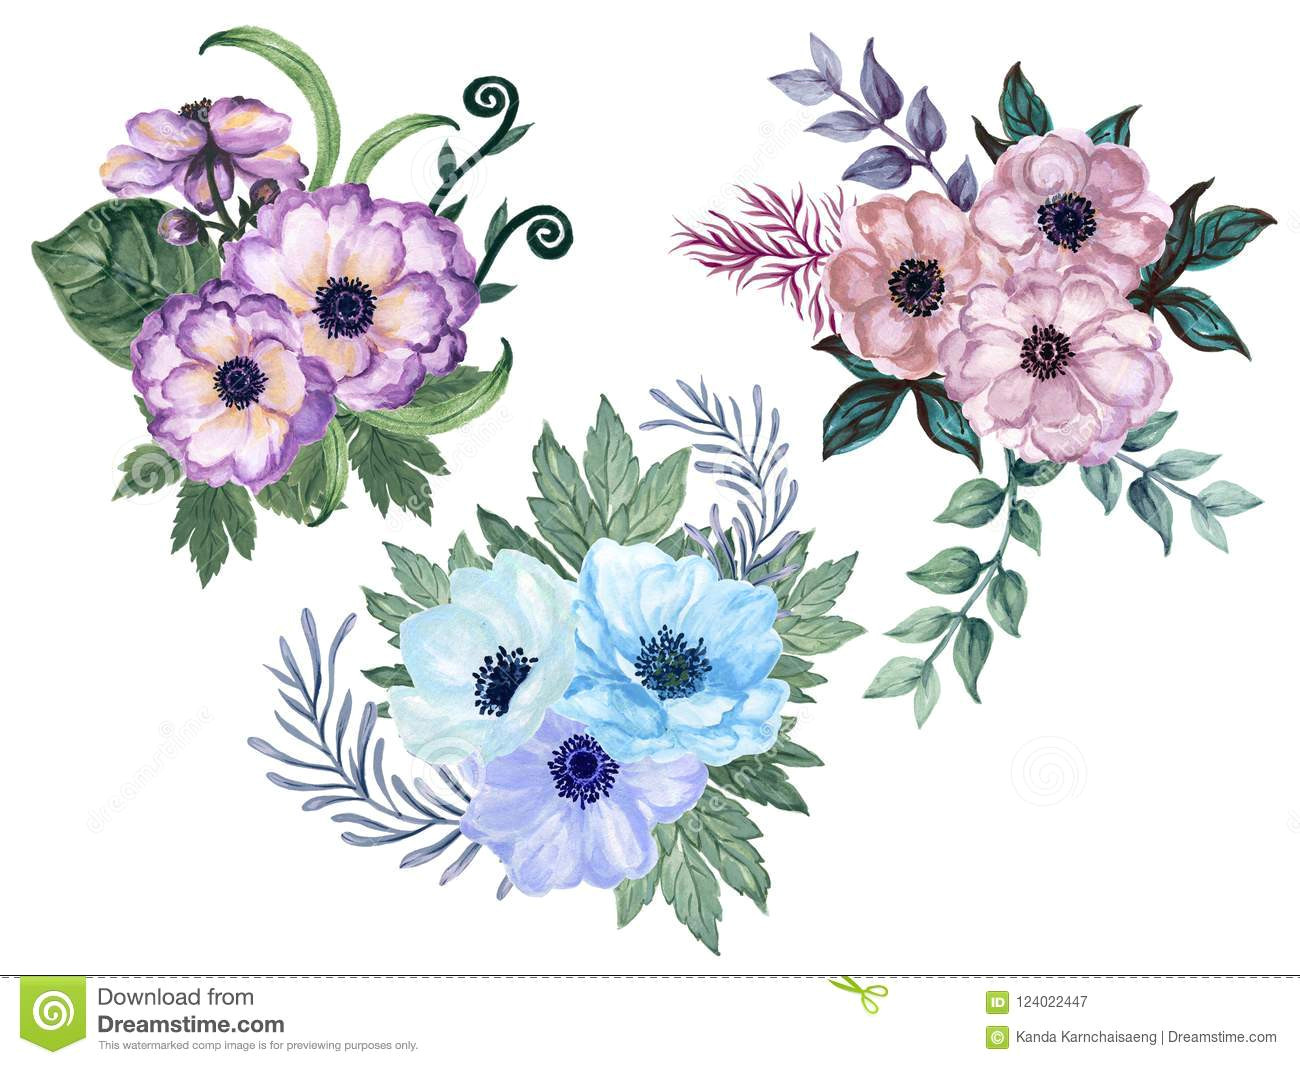 Drawings Of Flowers with Leaves Watercolor Gouache Anemone Floral and Leaves Bouquet Hand Drawn